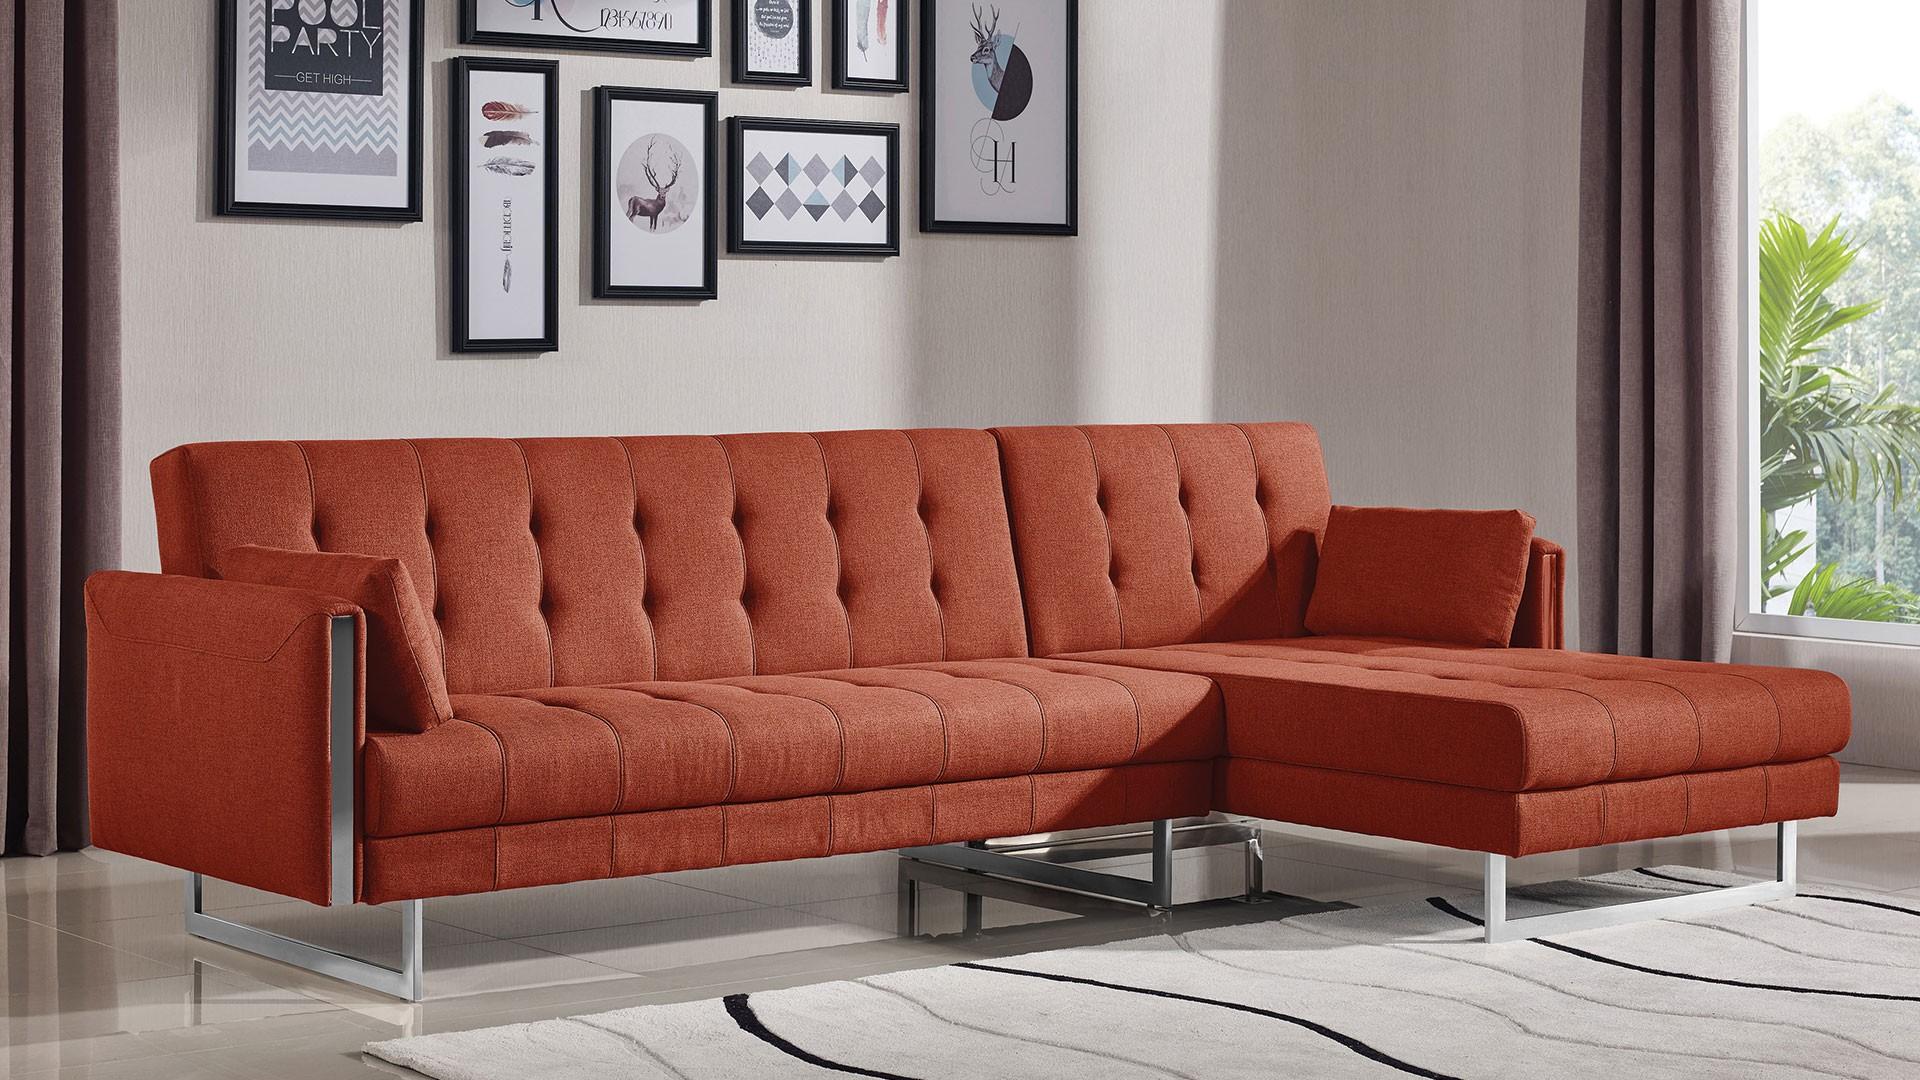 Contemporary Sectional Sofa Bed Andrea AHU-M1600-SEC-FLMOR in Orange-red Fabric